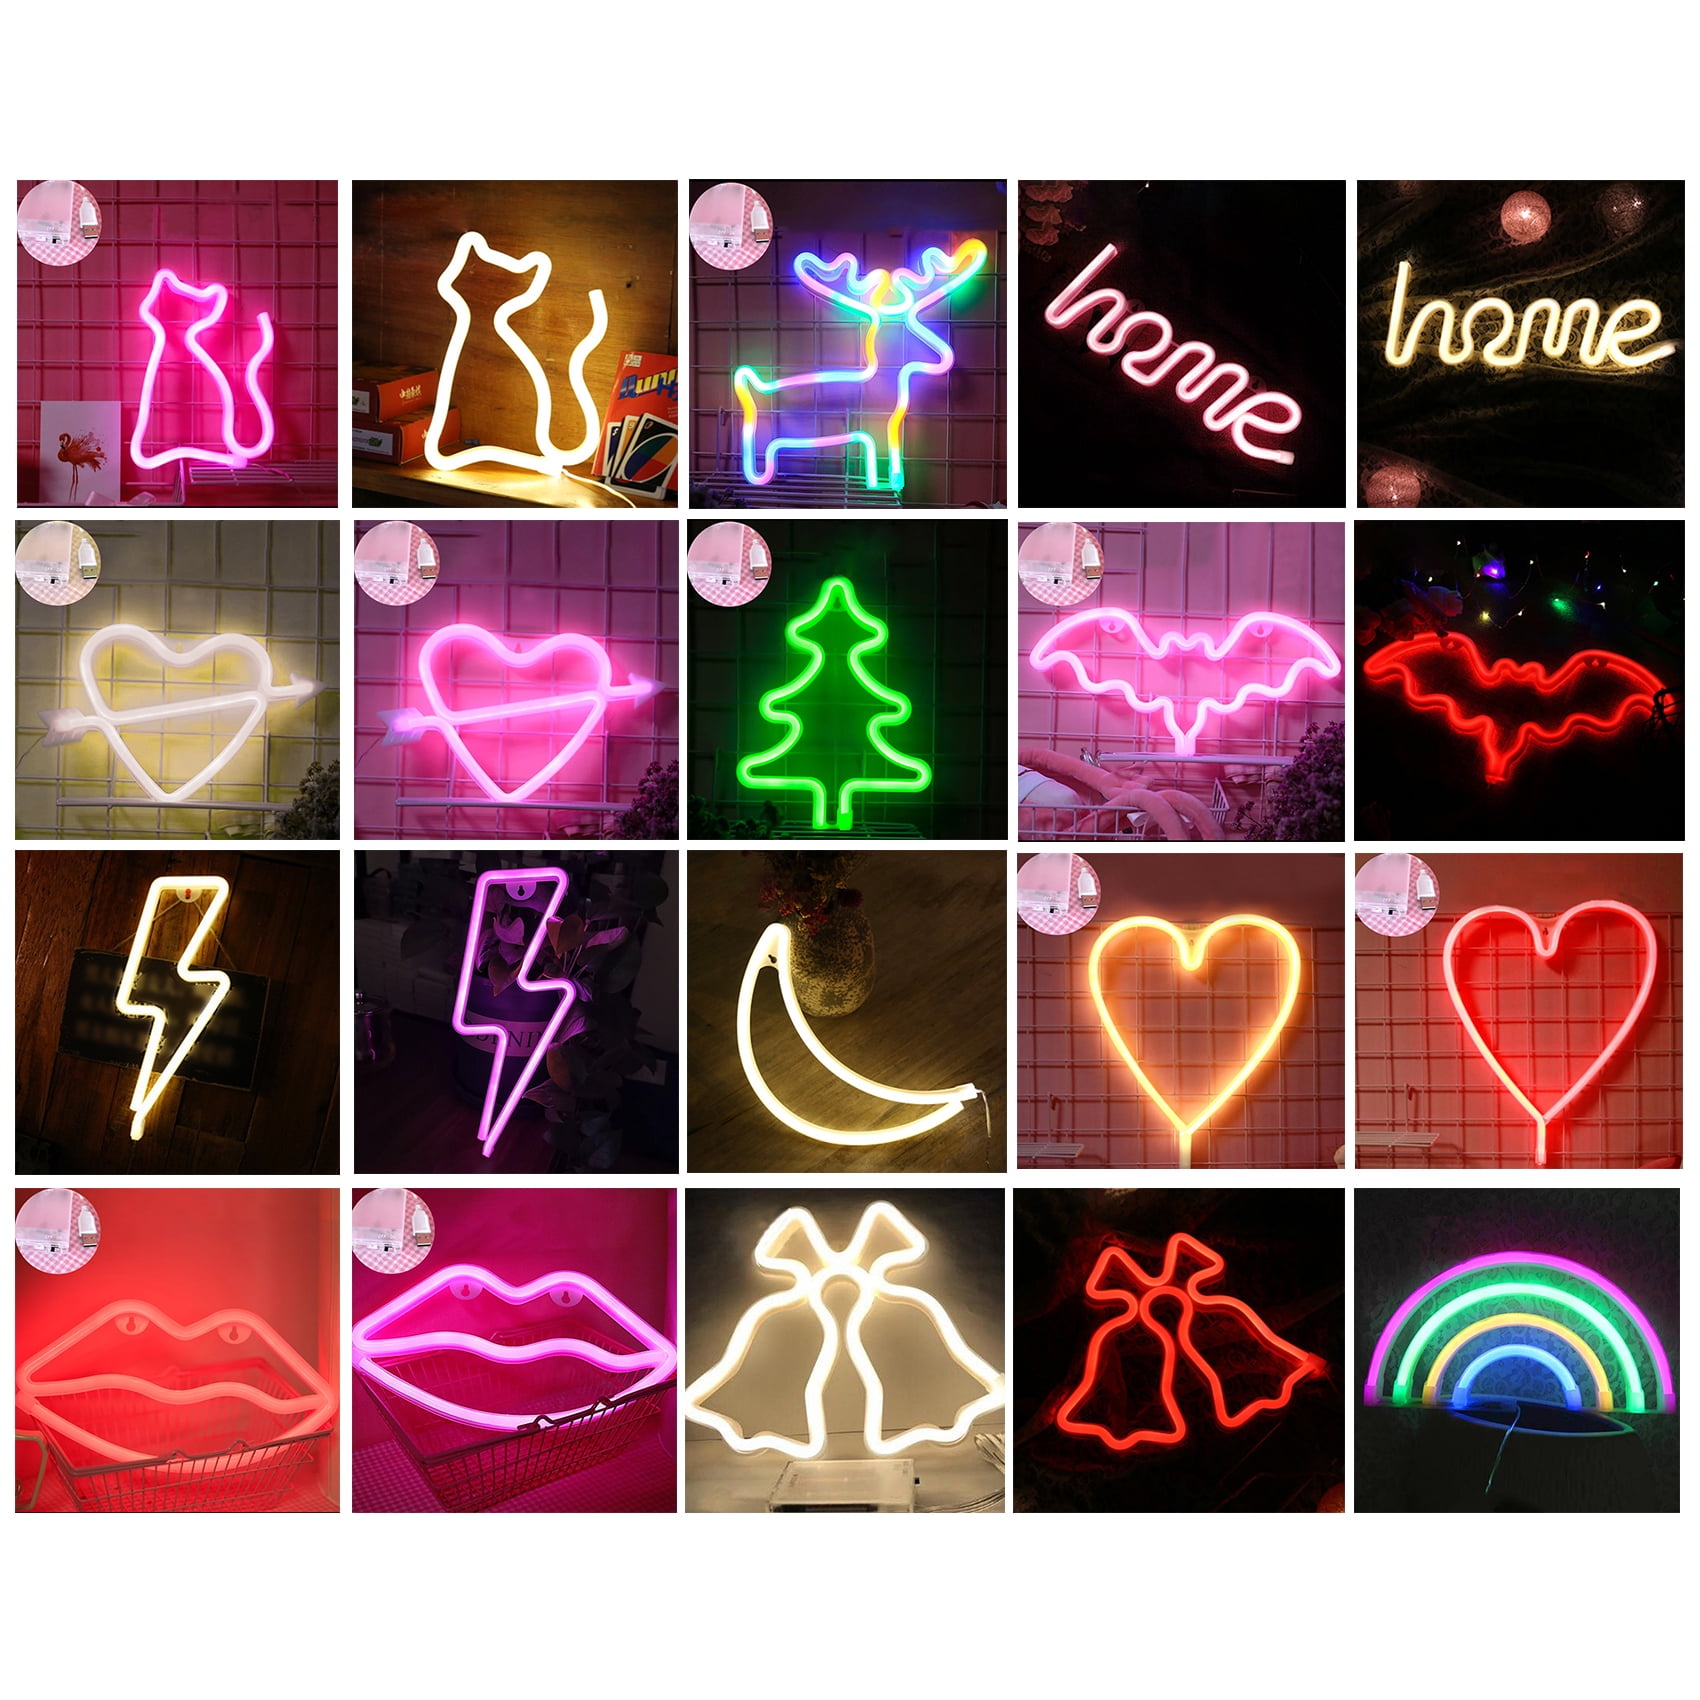 Details about   Neon Signs Lightning Bolt Battery Operated and USB Powered Warm White Art LED... 